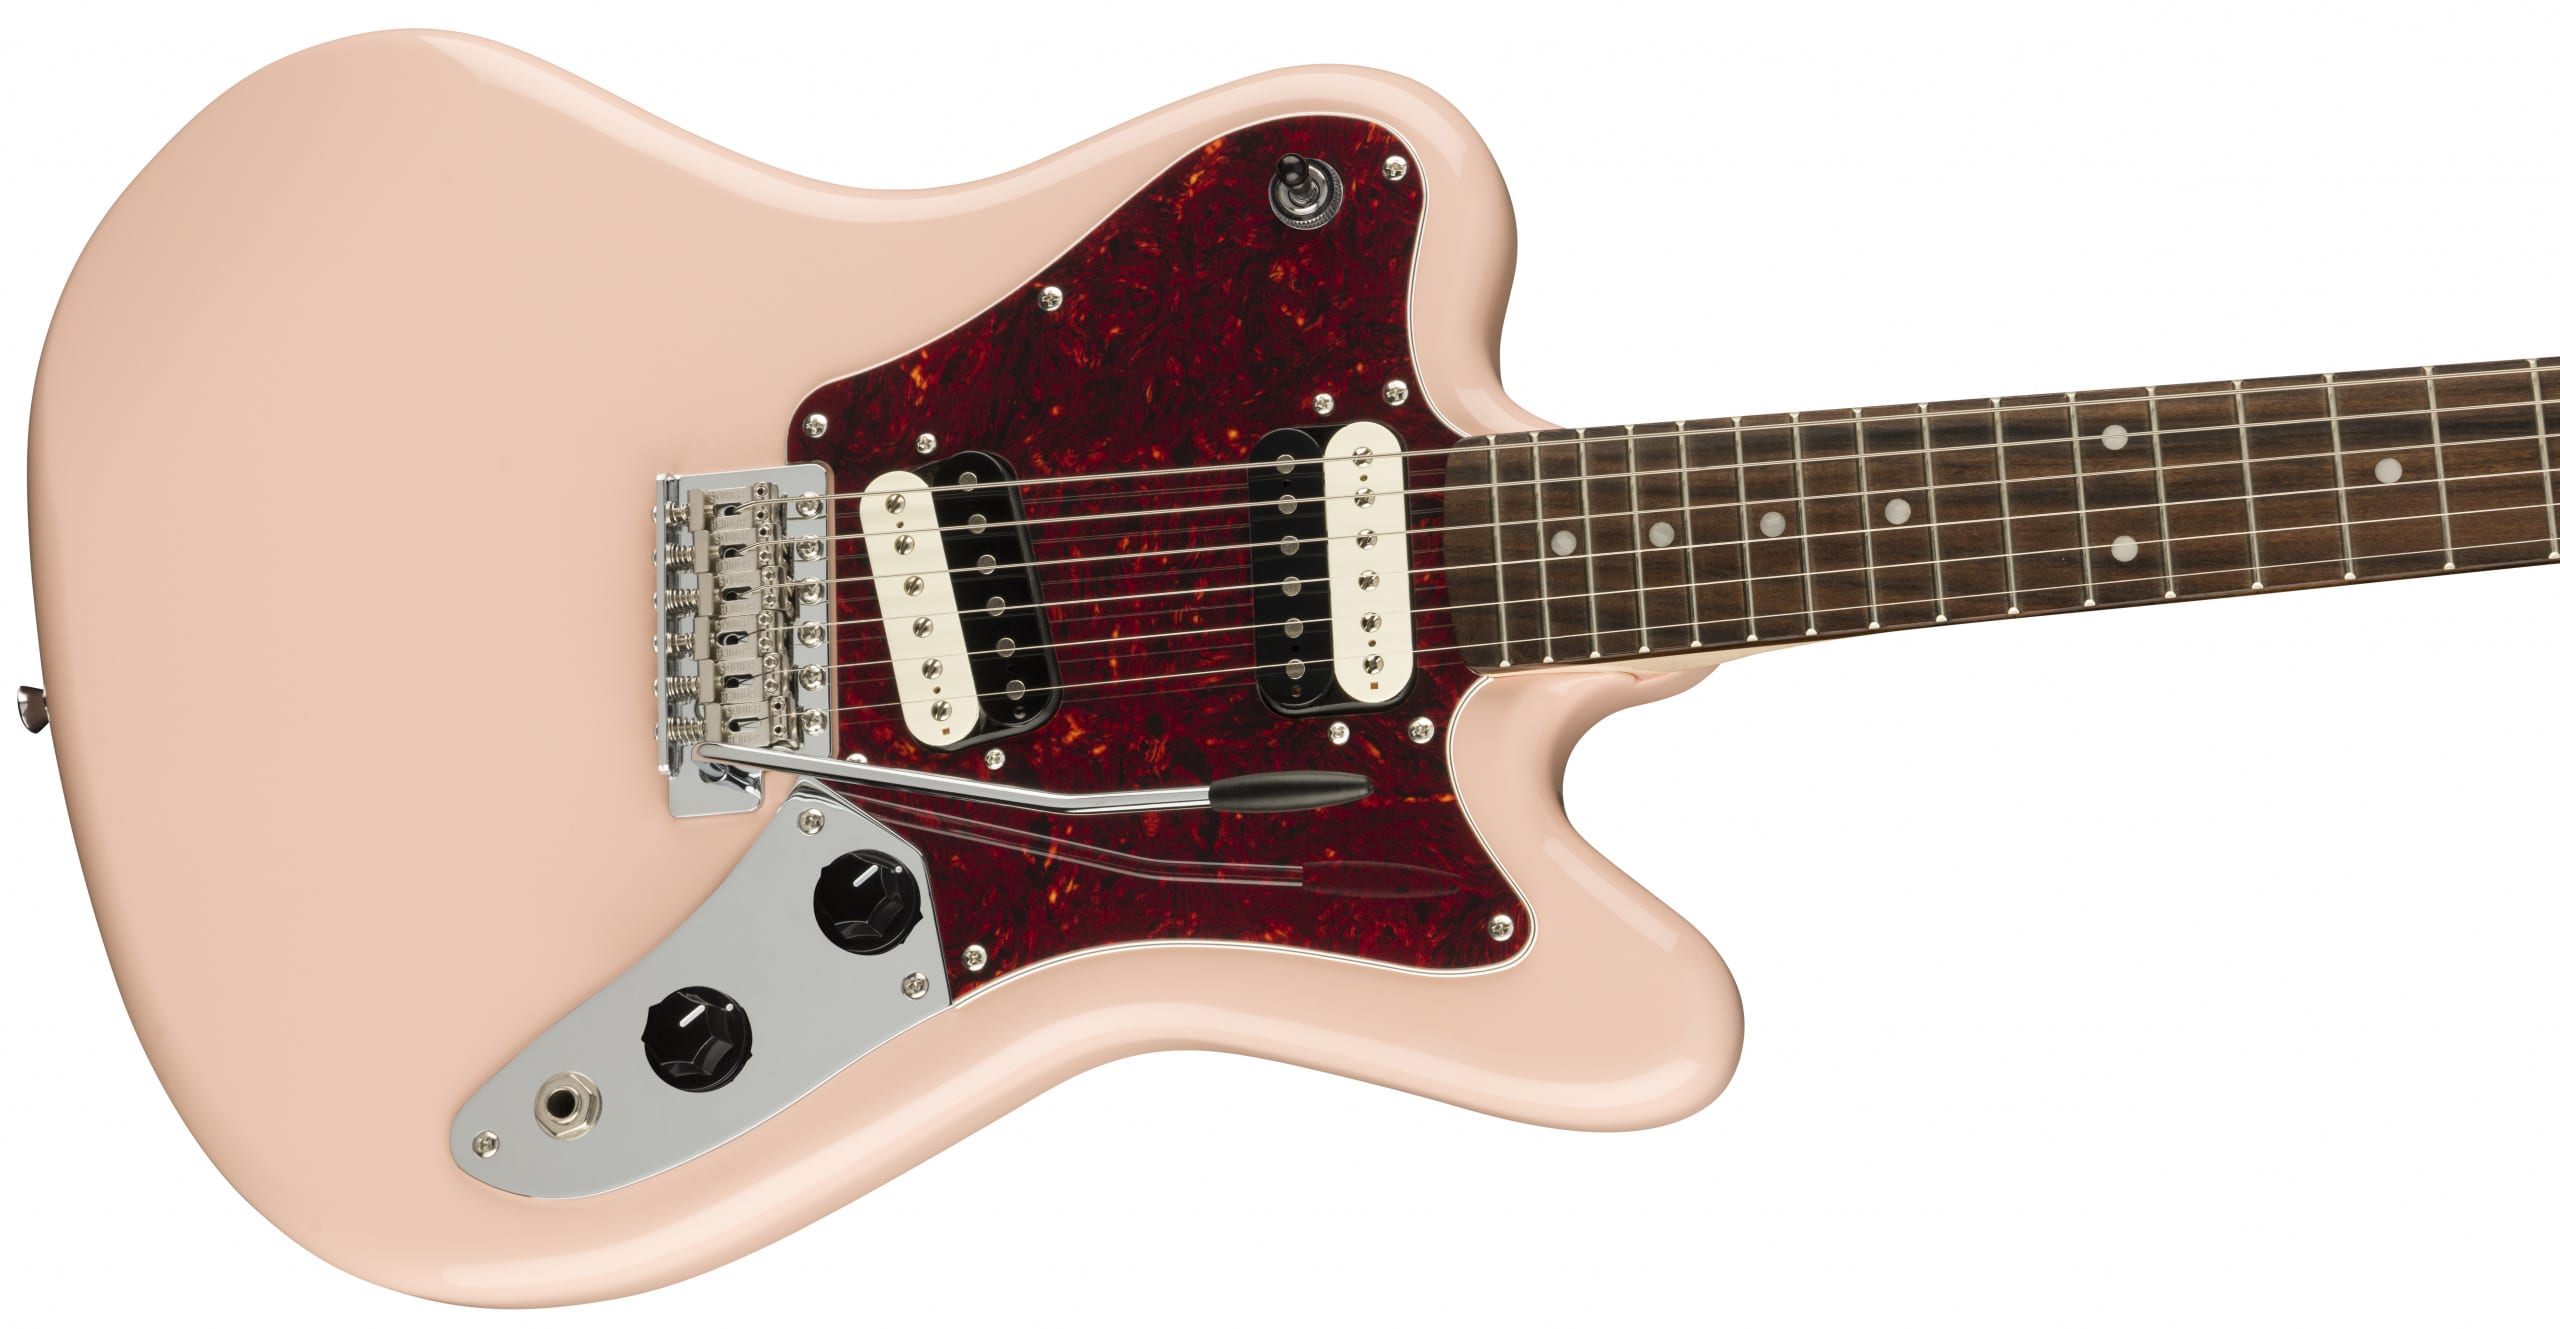 Squier Paranormal Range Super Sonic Shell Pink scaled